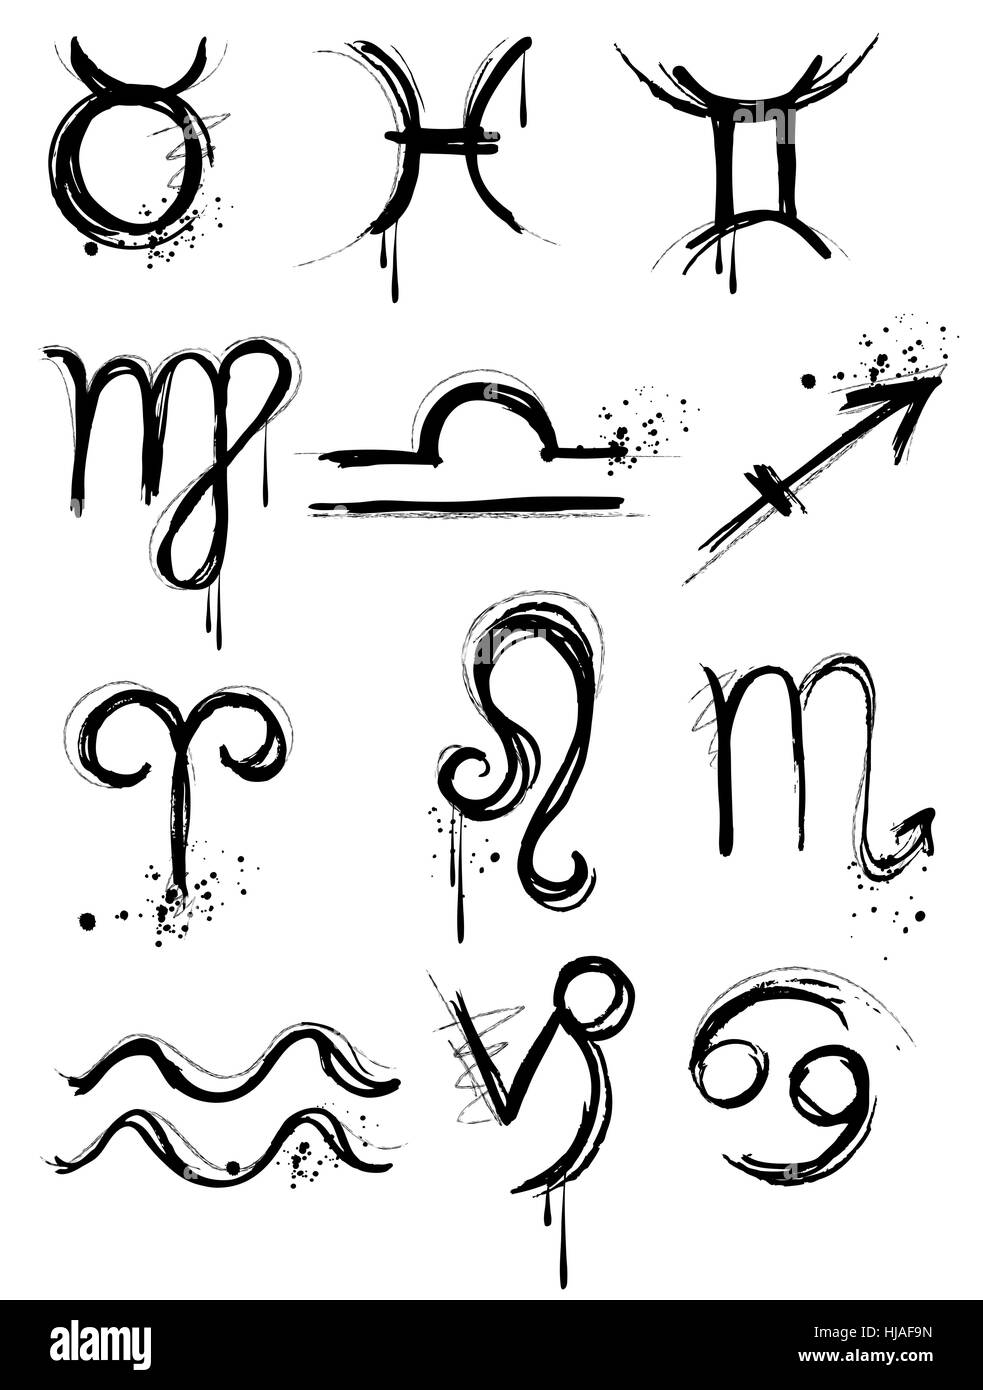 zodiac symbols, carelessly painted in black on a white background. Stock Vector